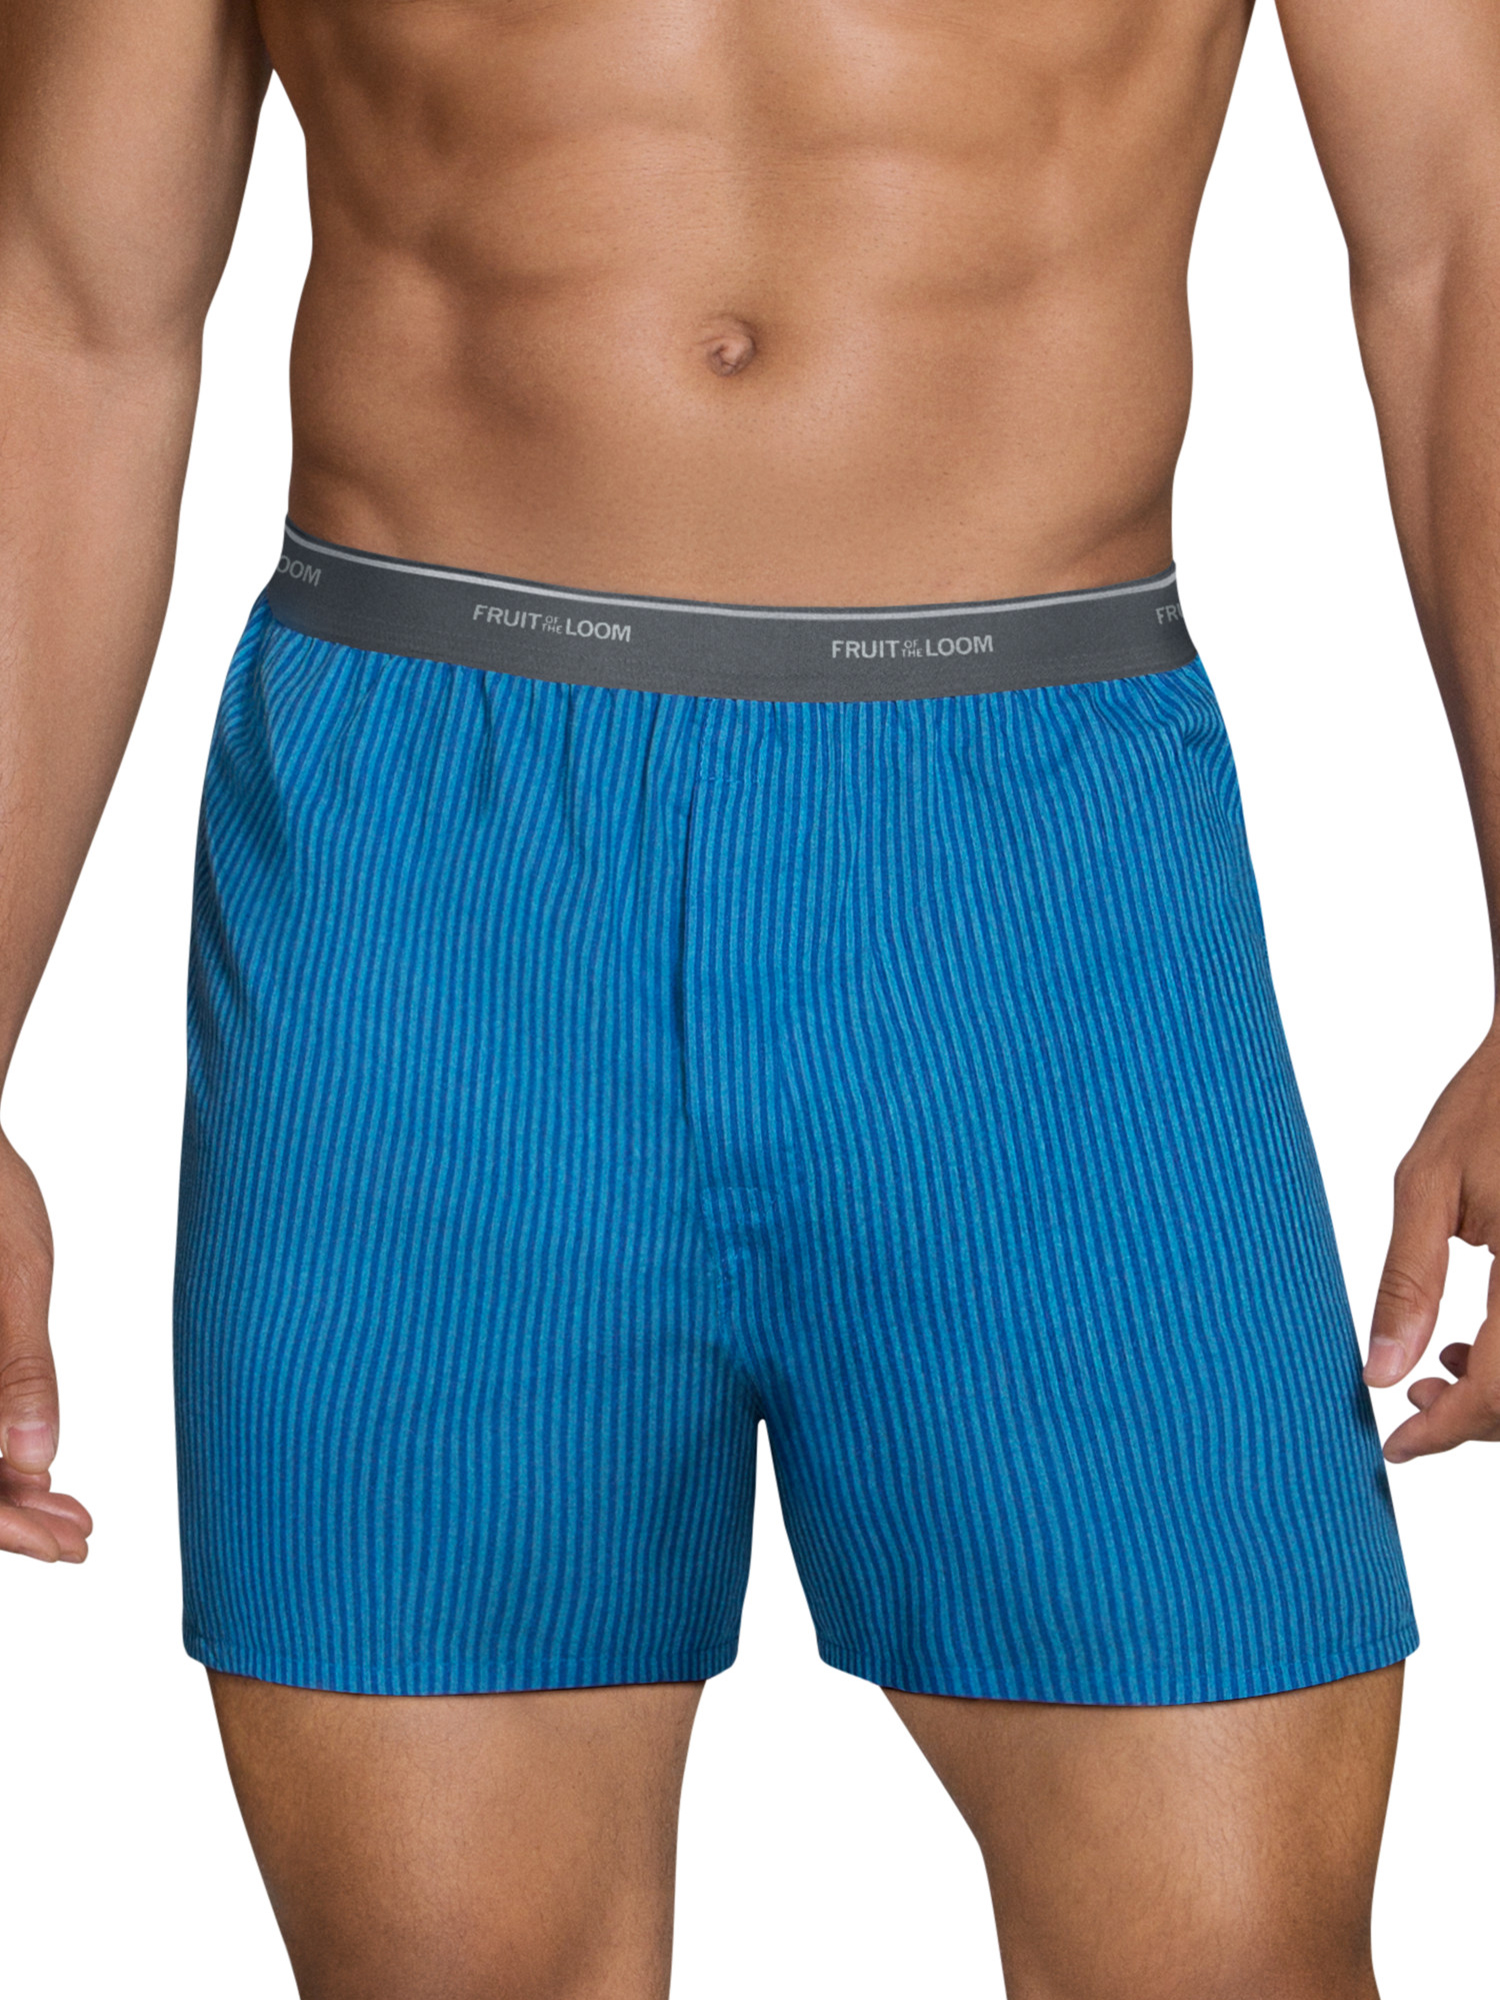 Fruit of the Loom Men's Woven Boxers, 6 Pack - image 5 of 6